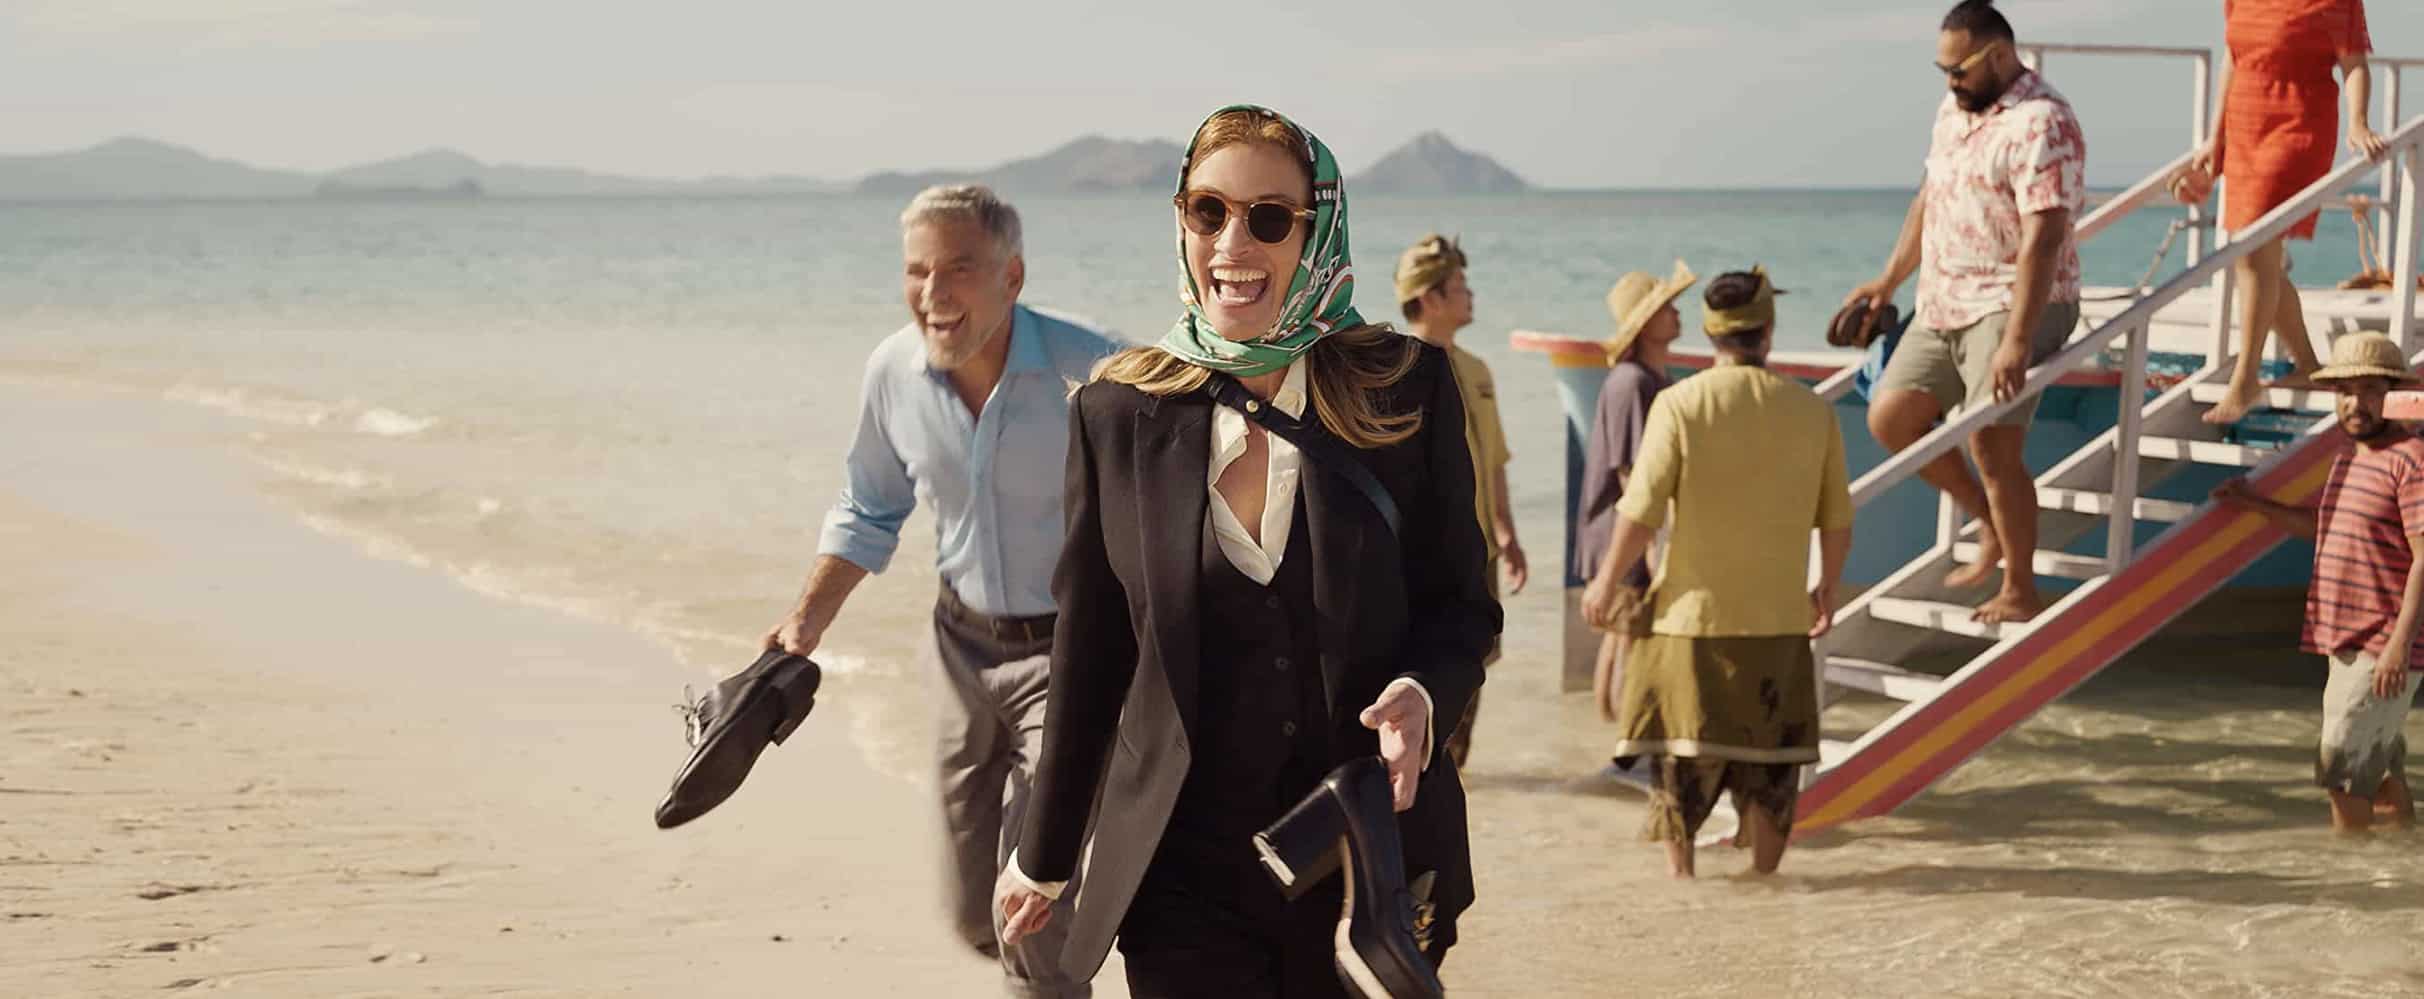  A woman with a big smile, a teal headwrap, and a black suit is in the forefront, and behind is a man in a blue button-down shirt in this image from Peacock.